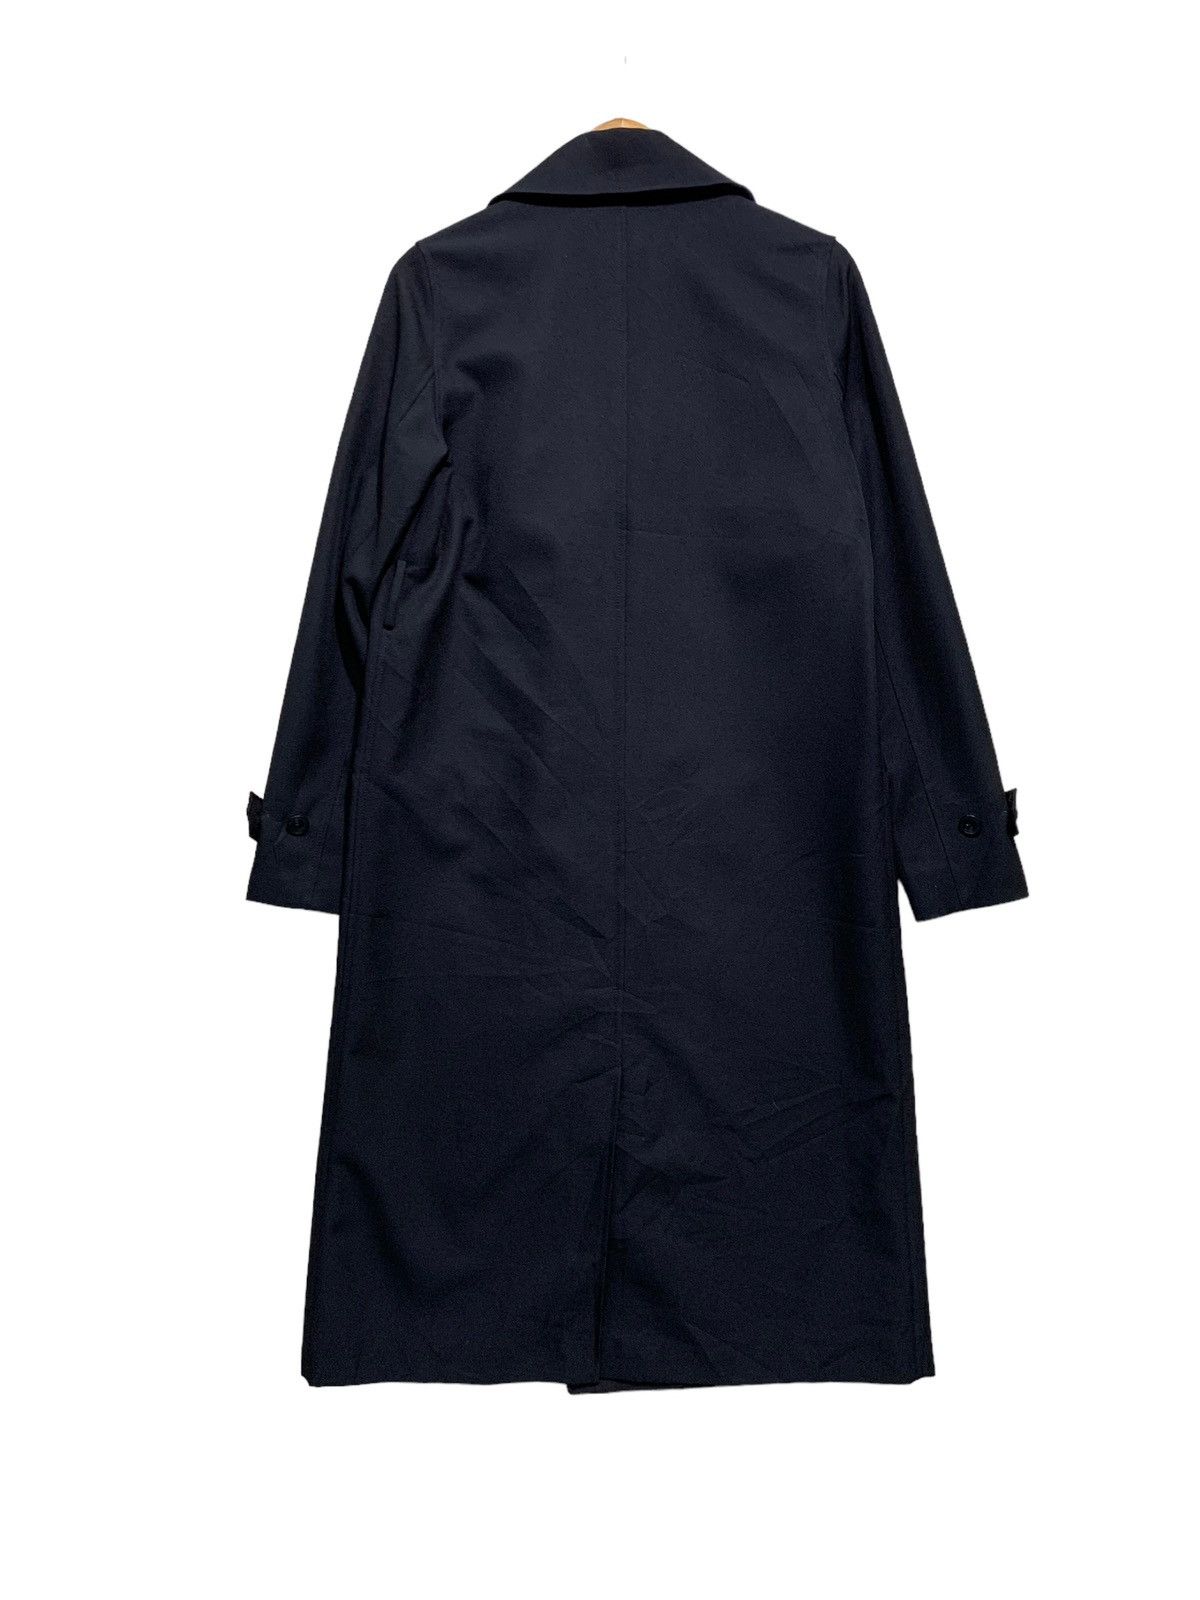 🔥ALEXANDER WANG DOUBLE BREAST TRENCH COATS - 5